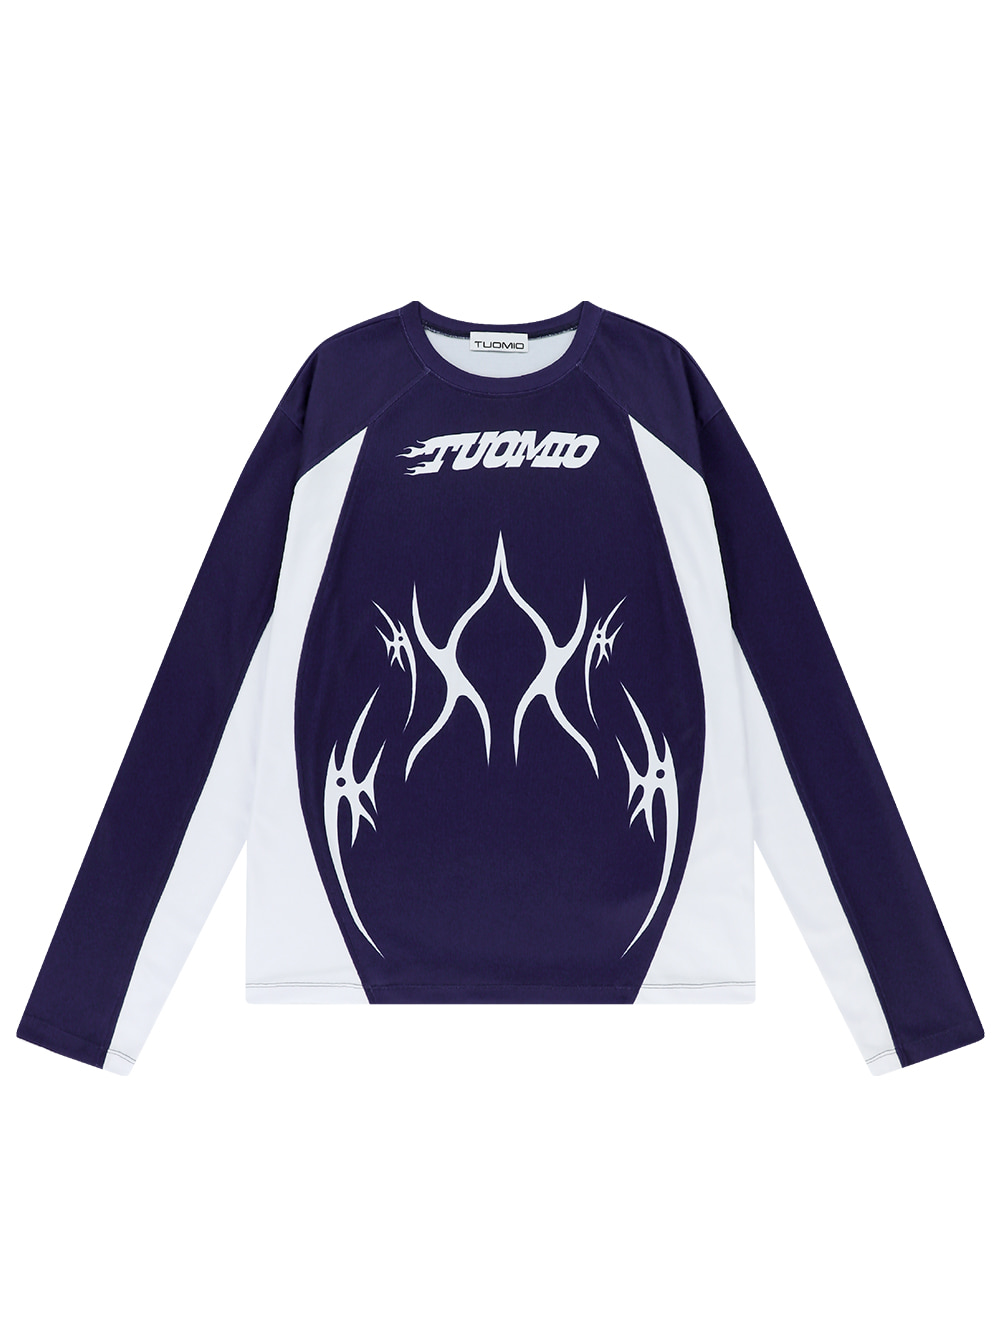 CURVED TRACK JERSEY [NAVY]